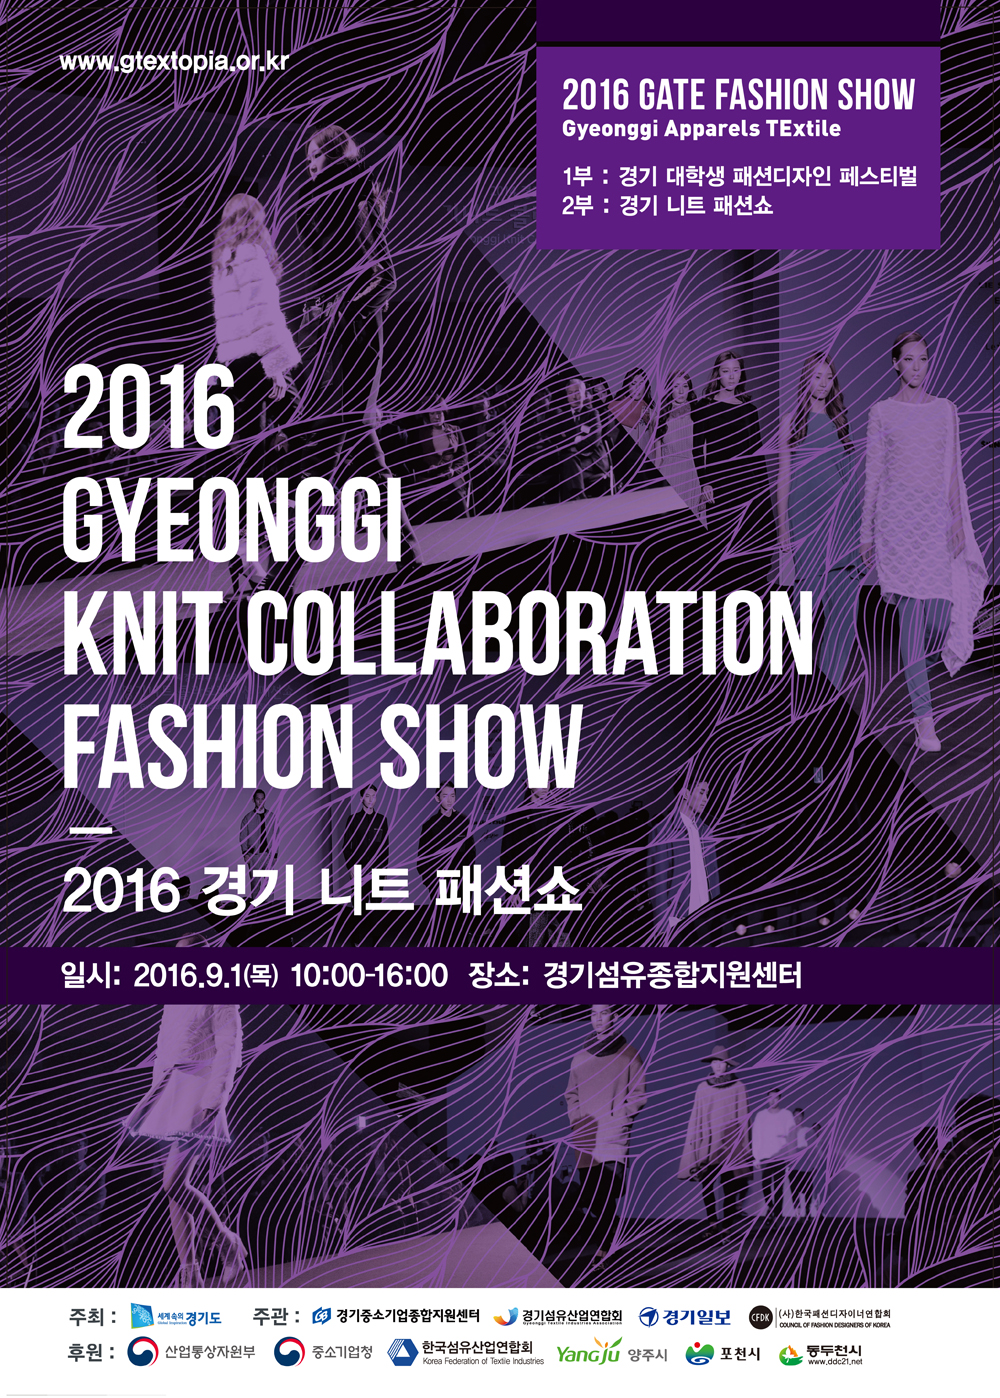 International designers to grace runways with textiles from Gyeonggi Province